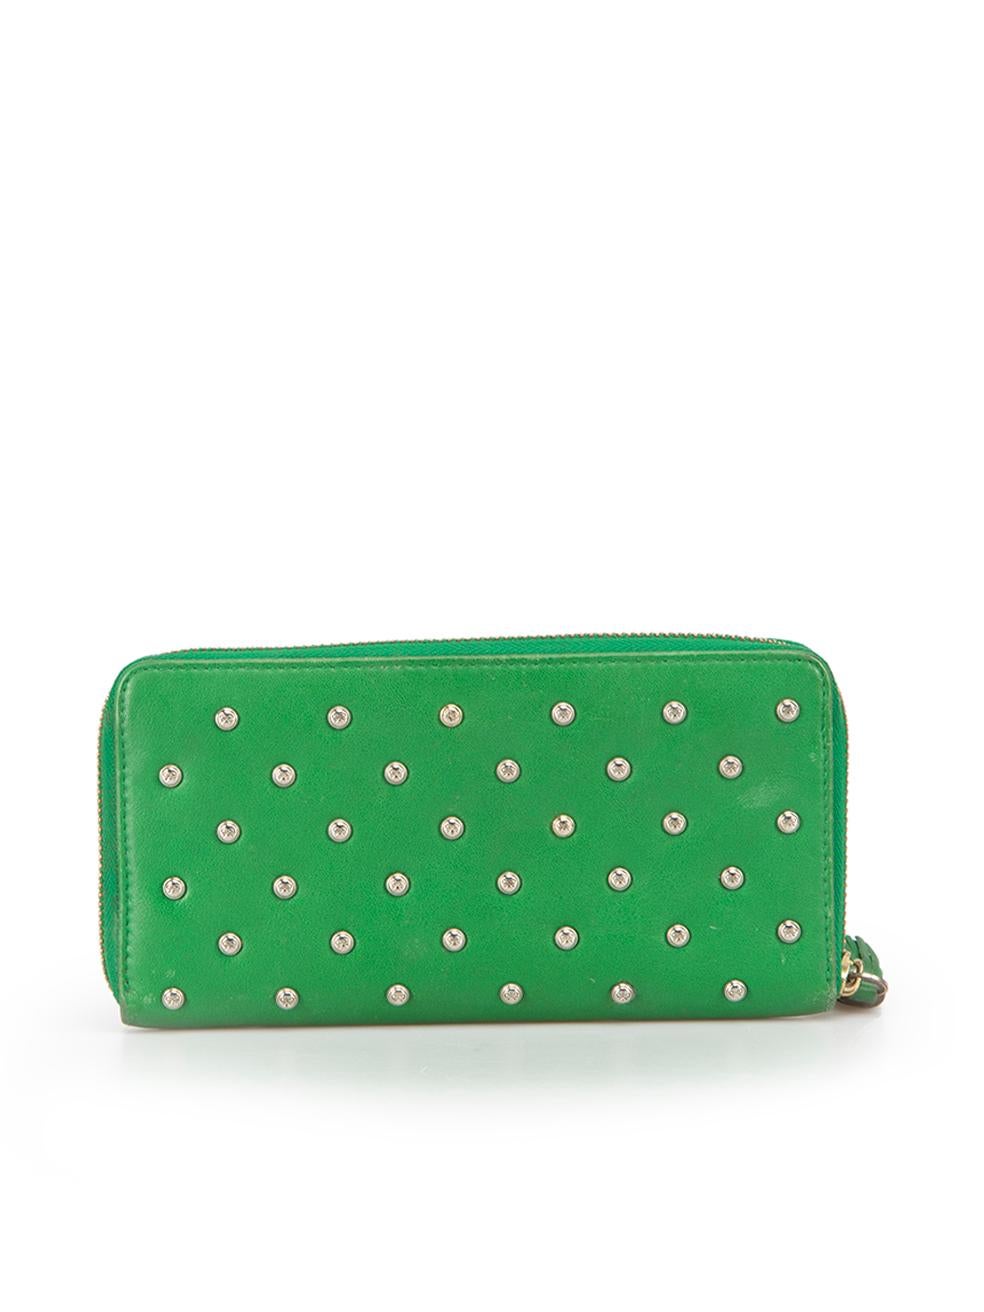 Anya Hindmarch Women's Green Leather Studded Continental Wallet In Good Condition For Sale In London, GB